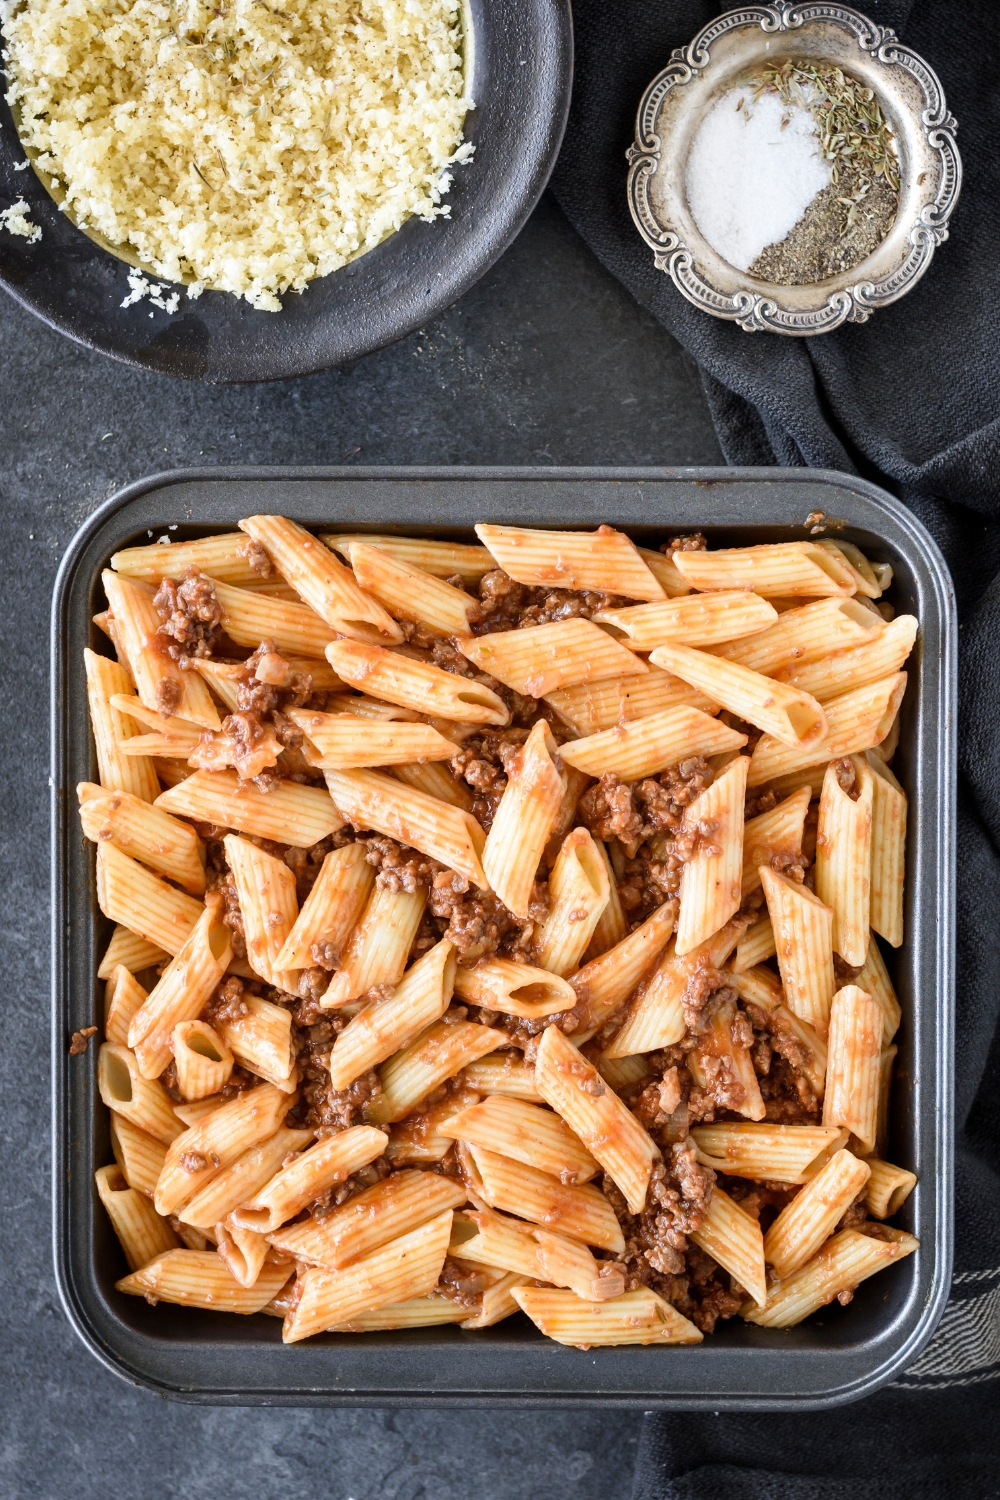 A square baking dish filled with cooked pasta and ground beef in tomato sauce.